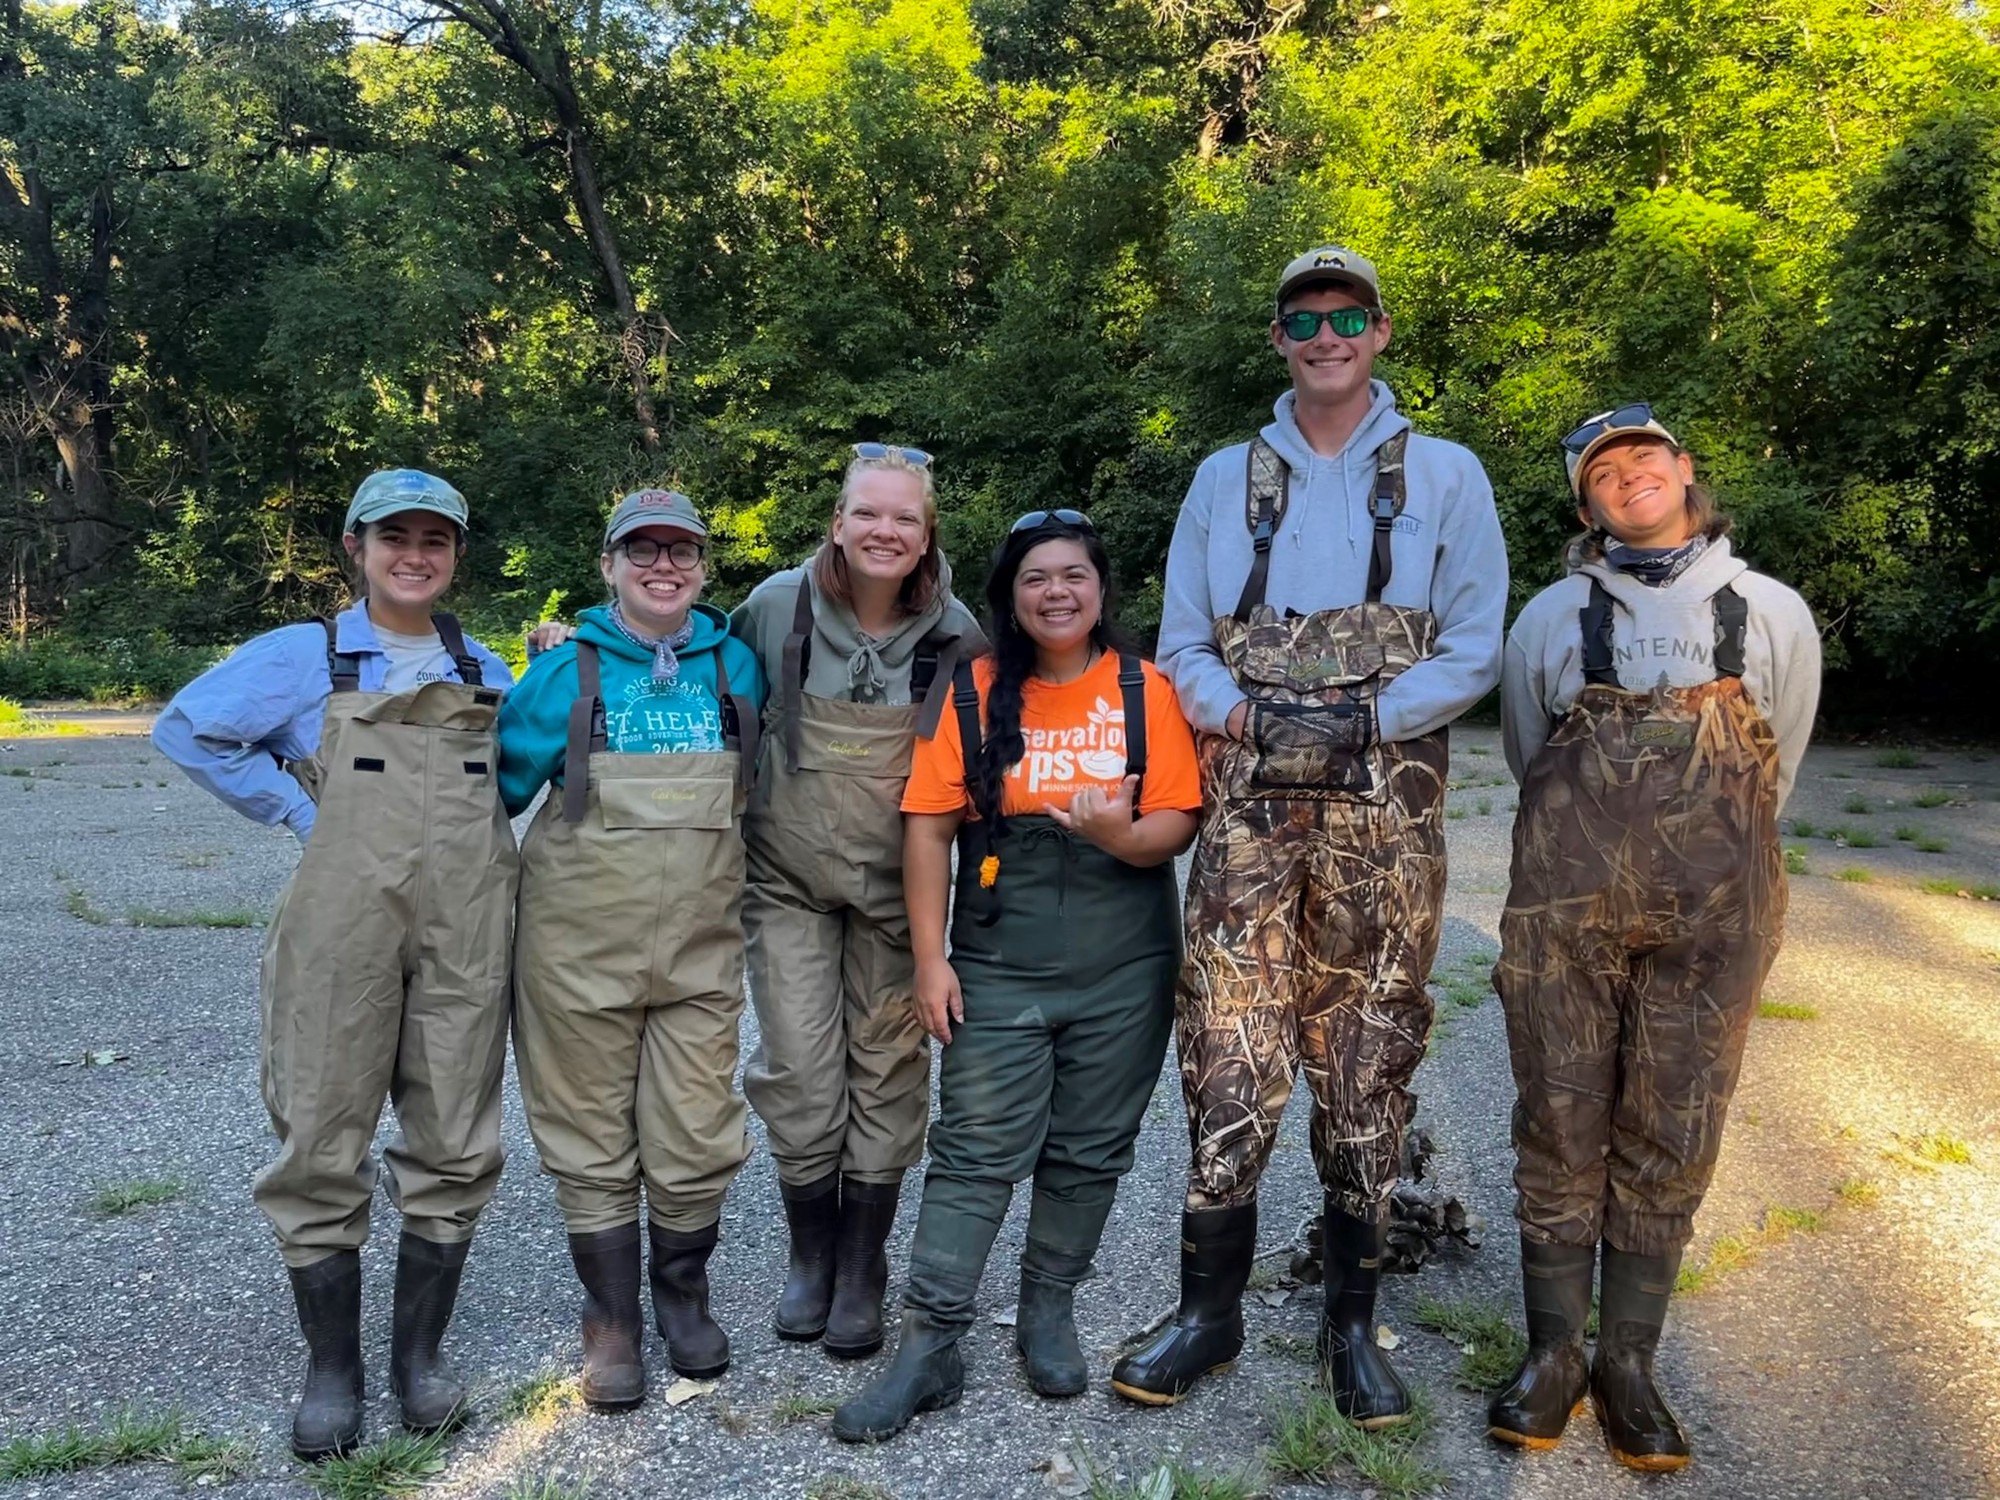 group photo of crew in waders